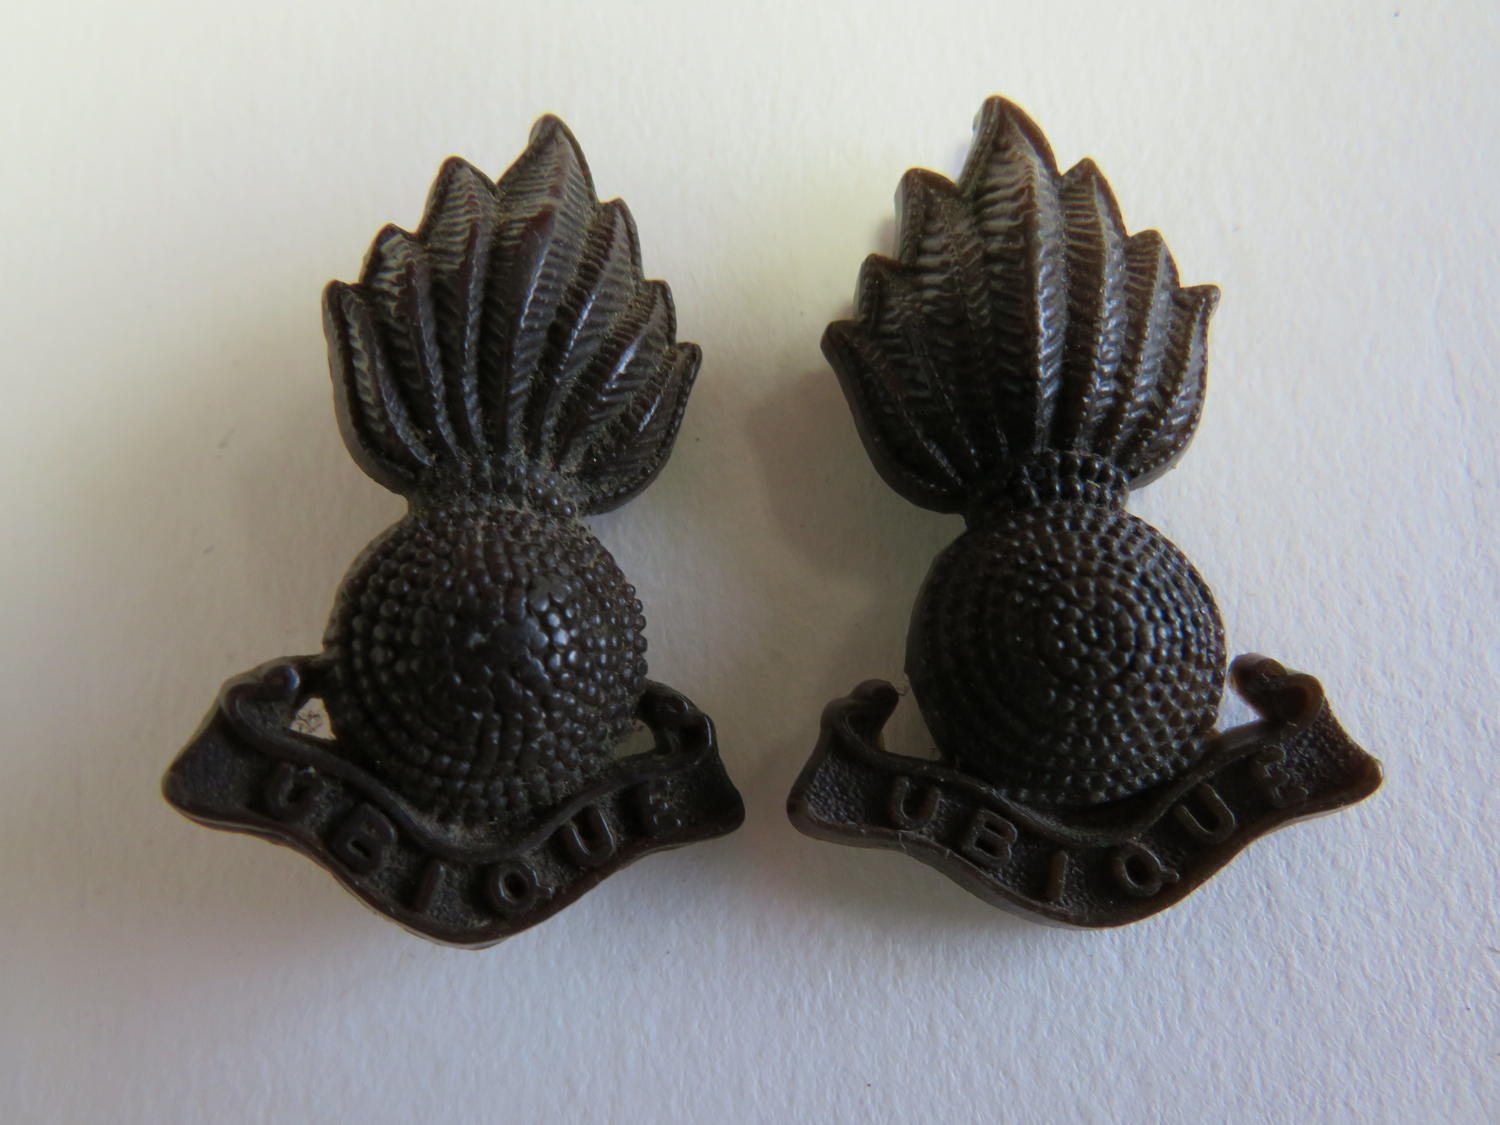 Two Plastic Economy Royal Artillery Collar/Forage Badges